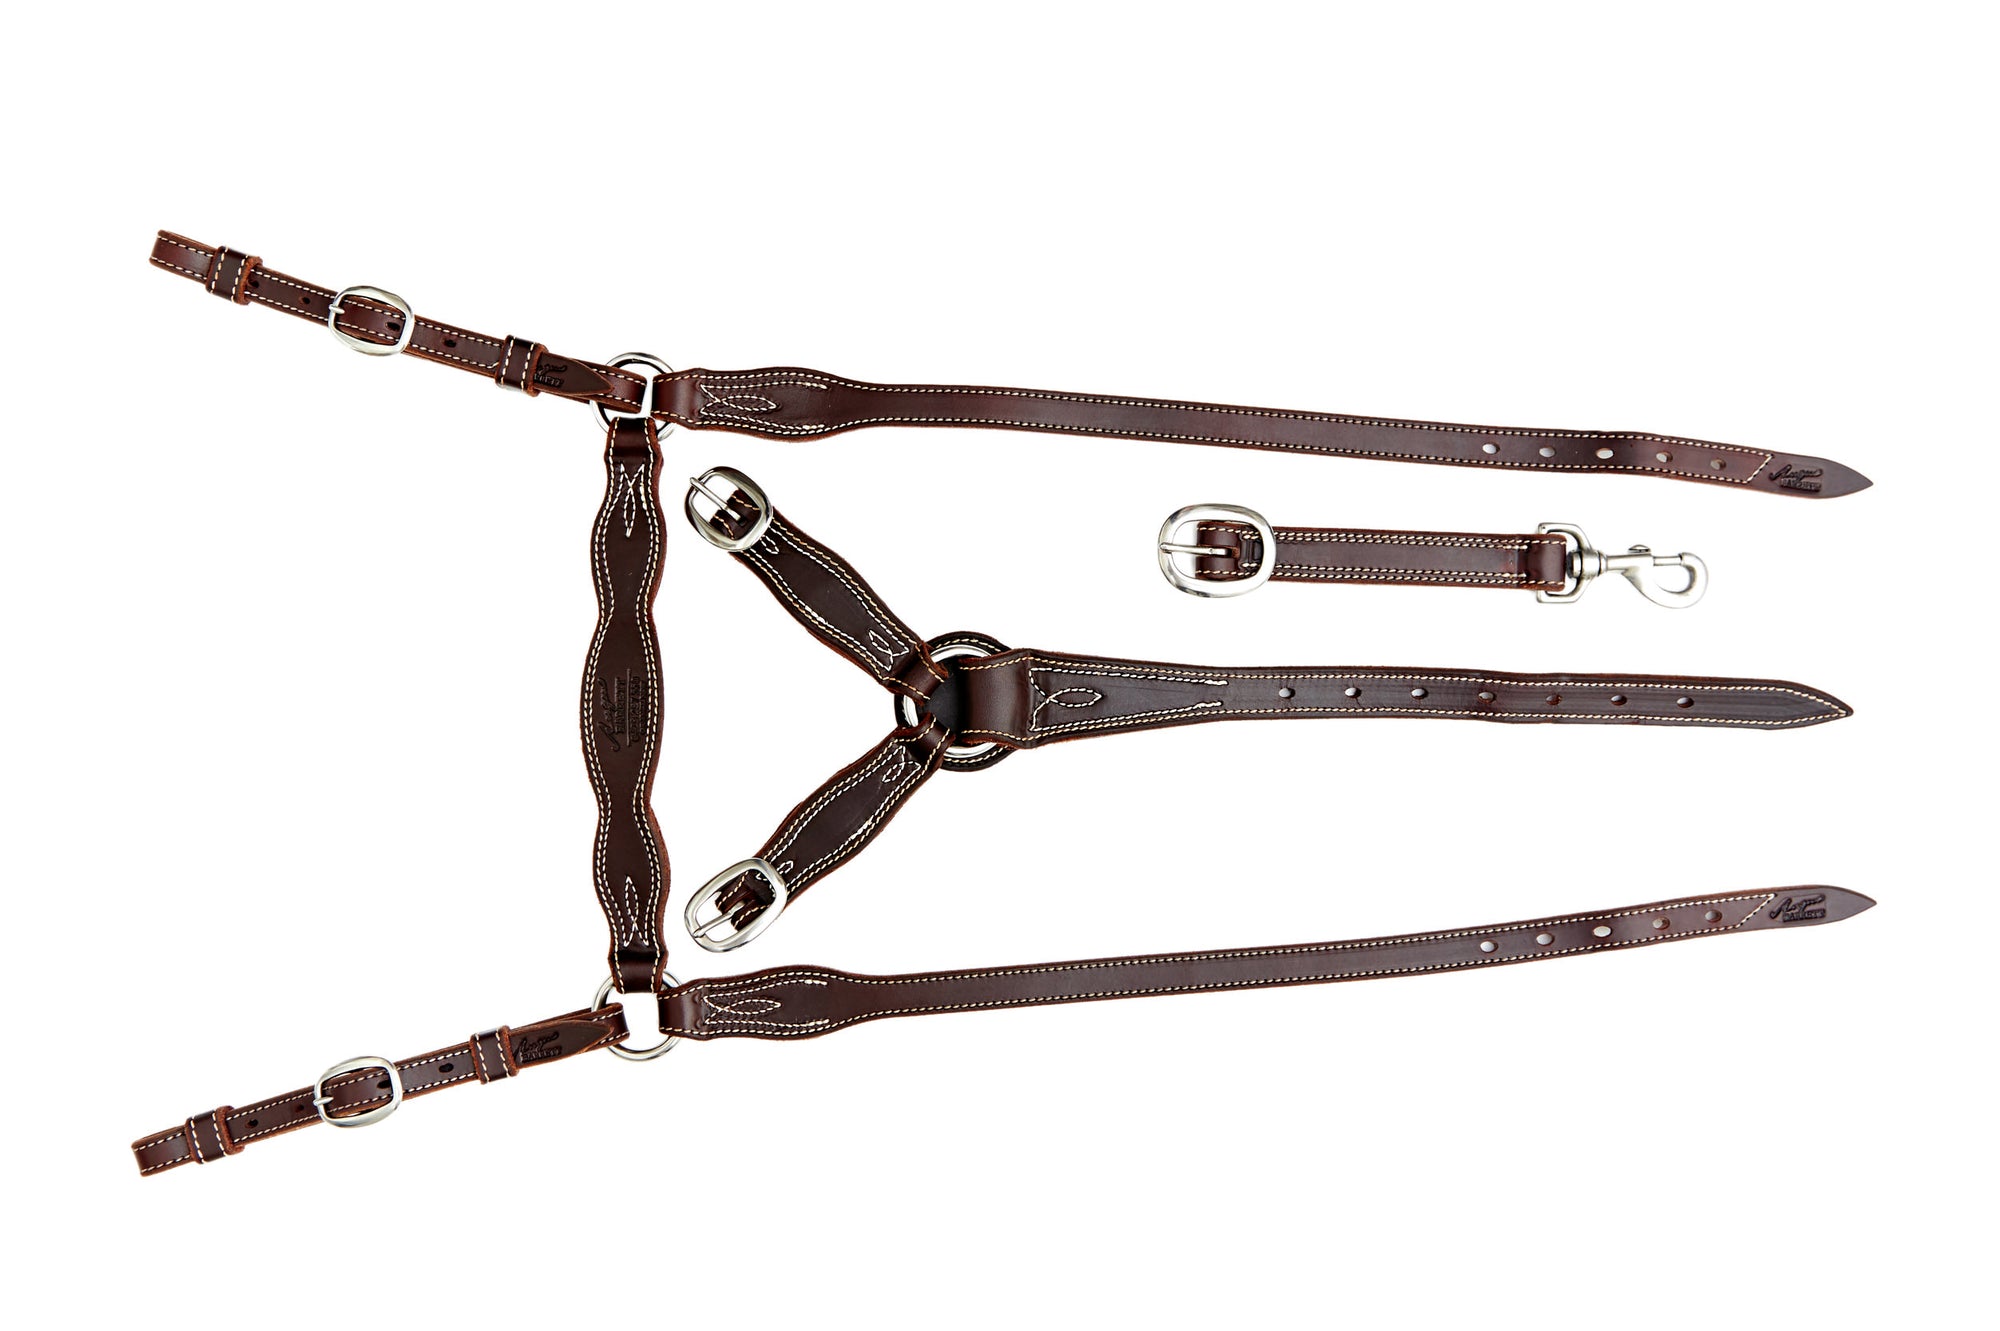 Angus Barrett Station Breastplate - Dark Natural with stainless steel hardware - Fully Stitched